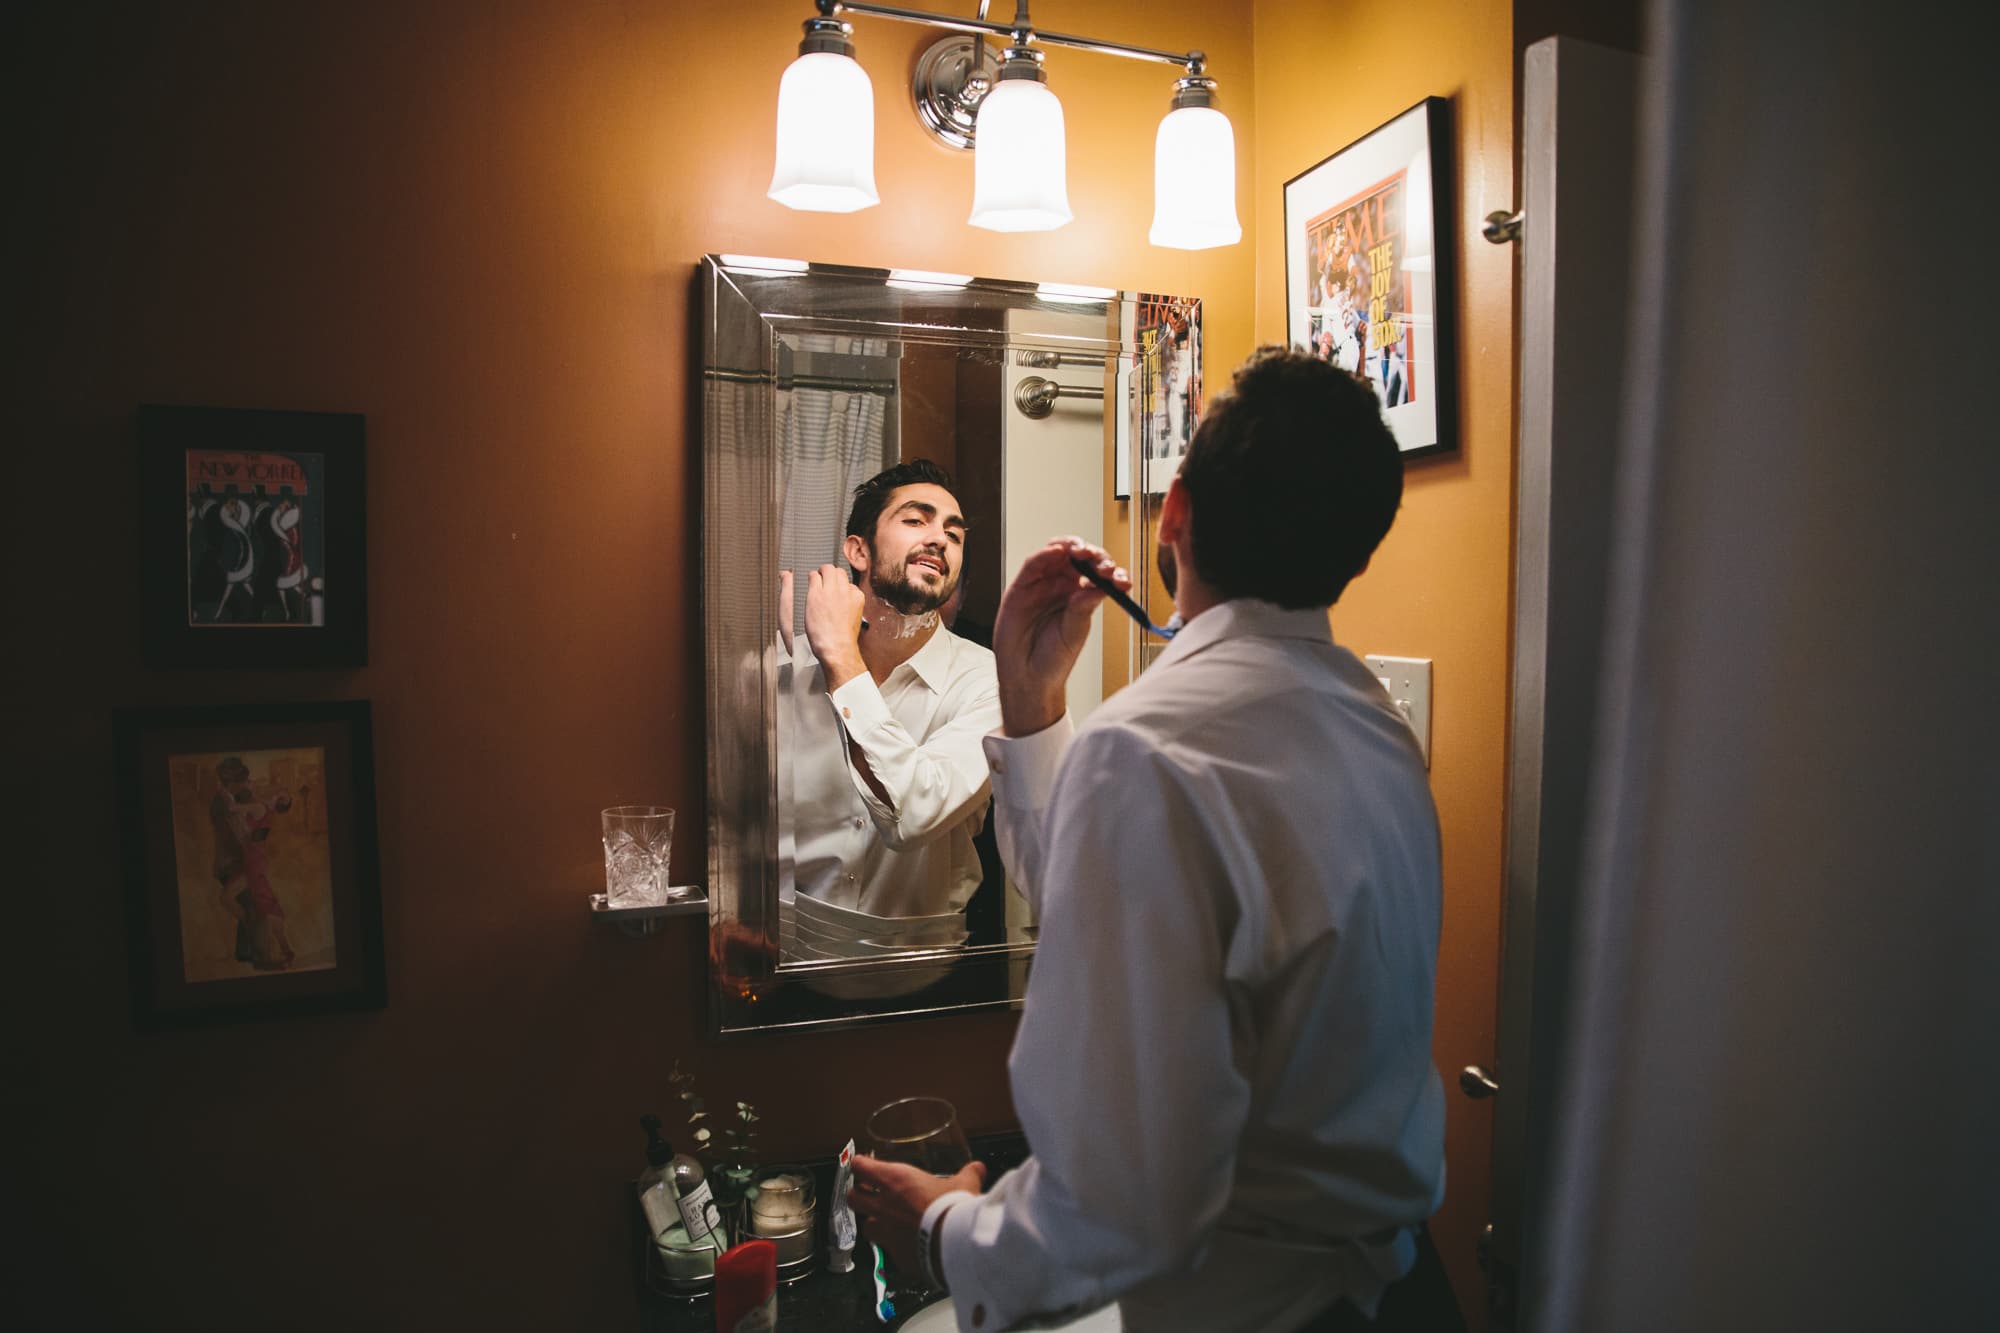 This documentary photograph of a groom shaving before his wedding is one of the best wedding photographs of 2016